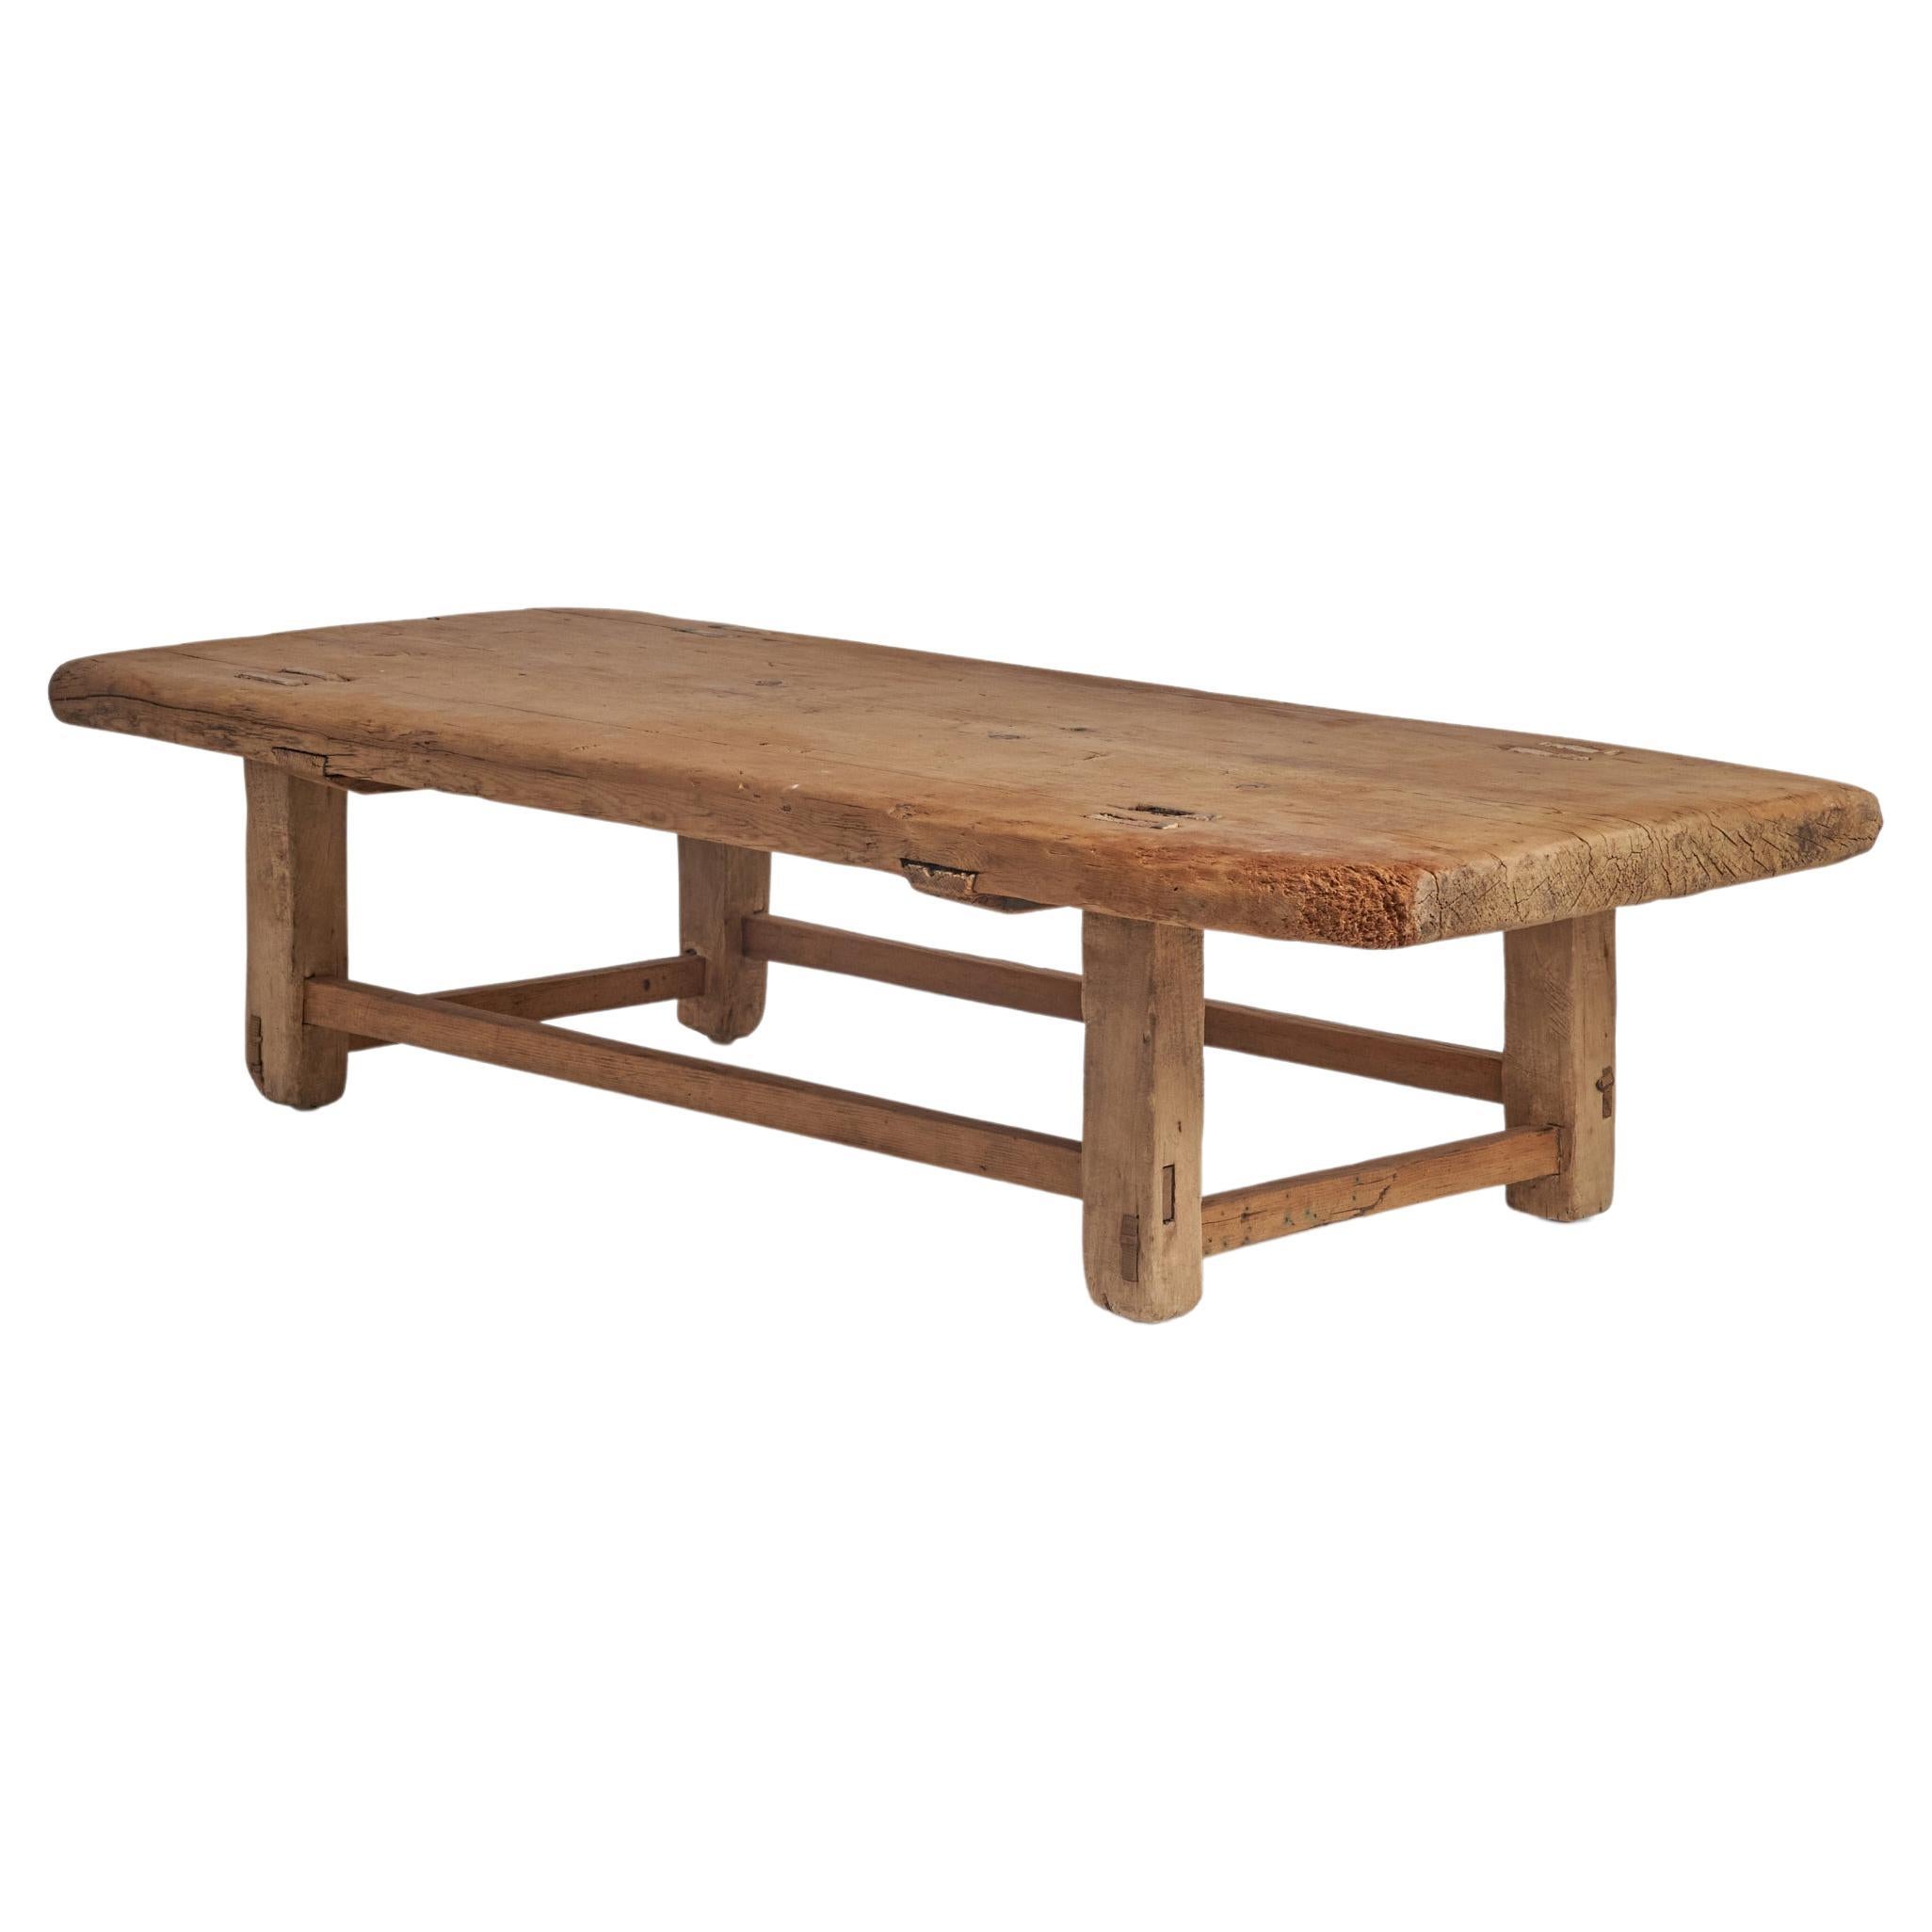 Swedish Craft, Farmers Low Table or Bench, Pine, Sweden, c. 1900 For Sale